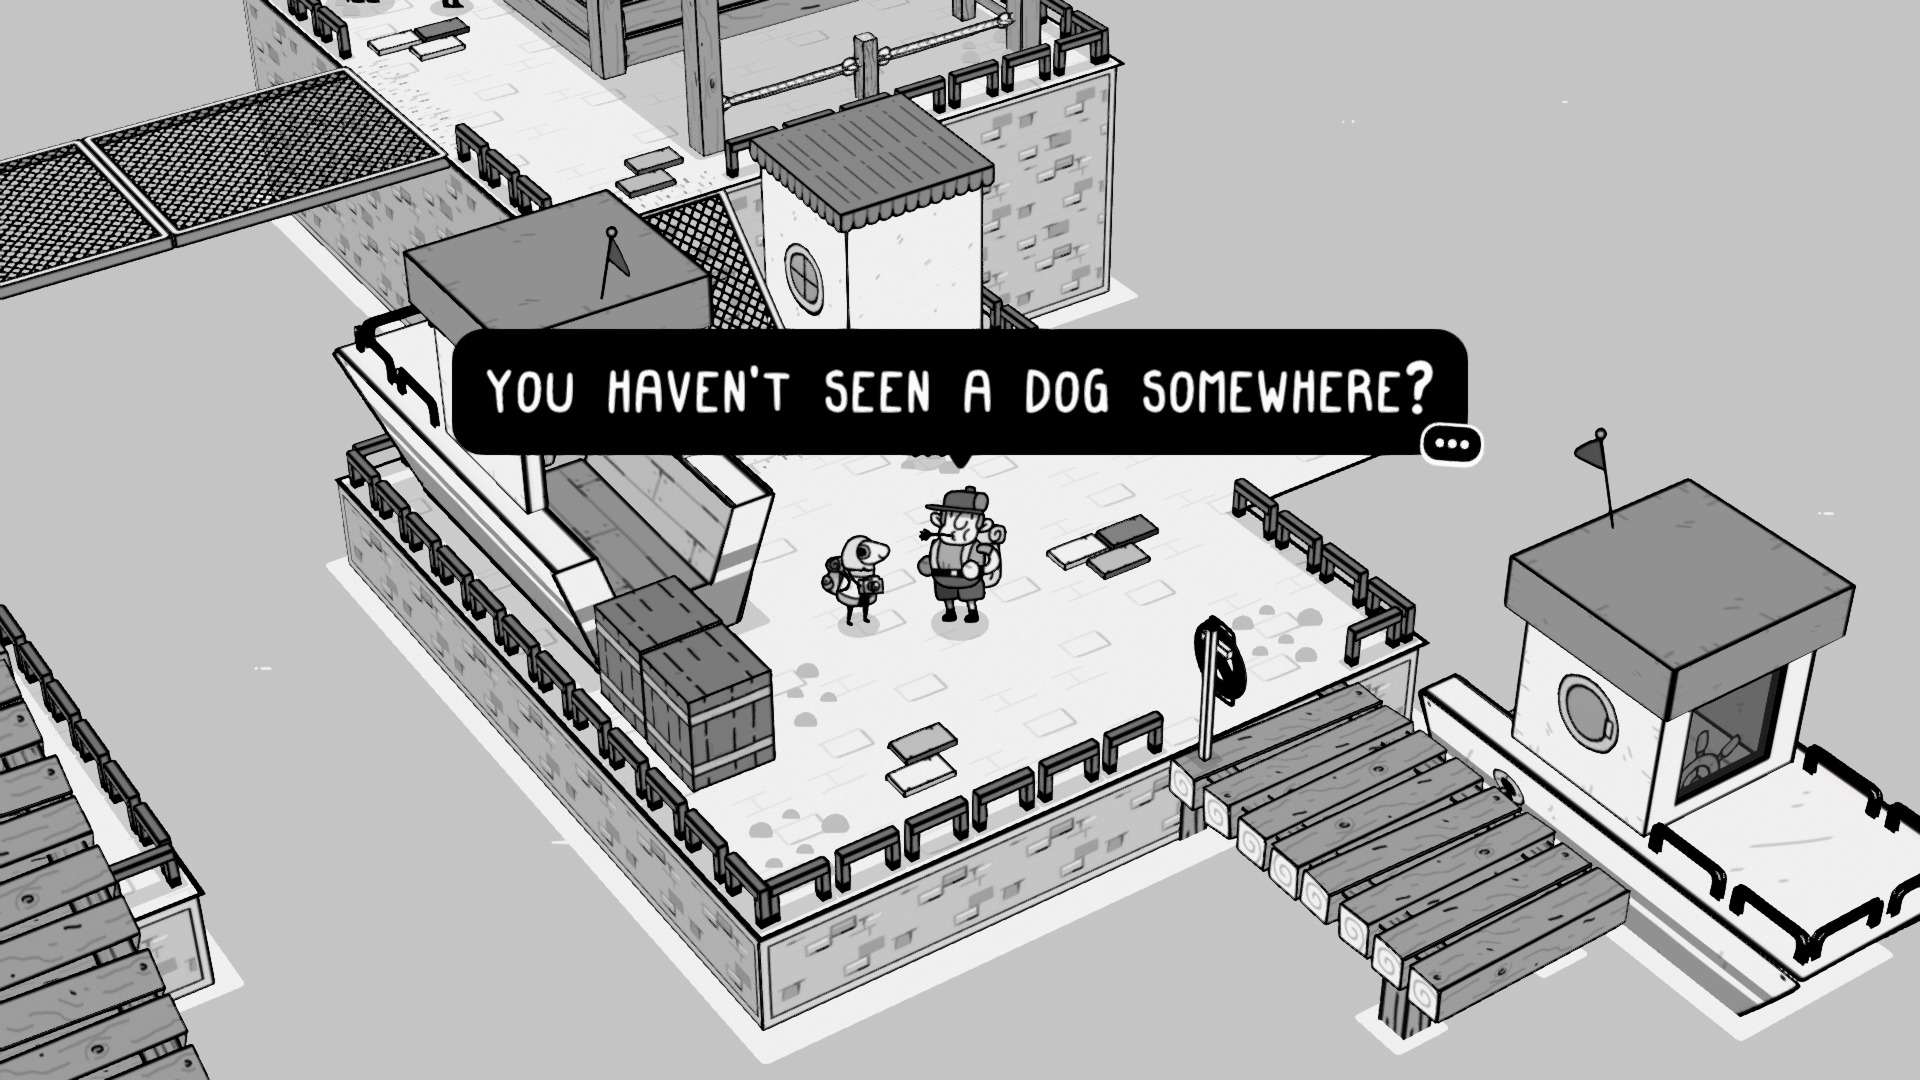 An NPC asking the main character of TOEM if they've seen a dog